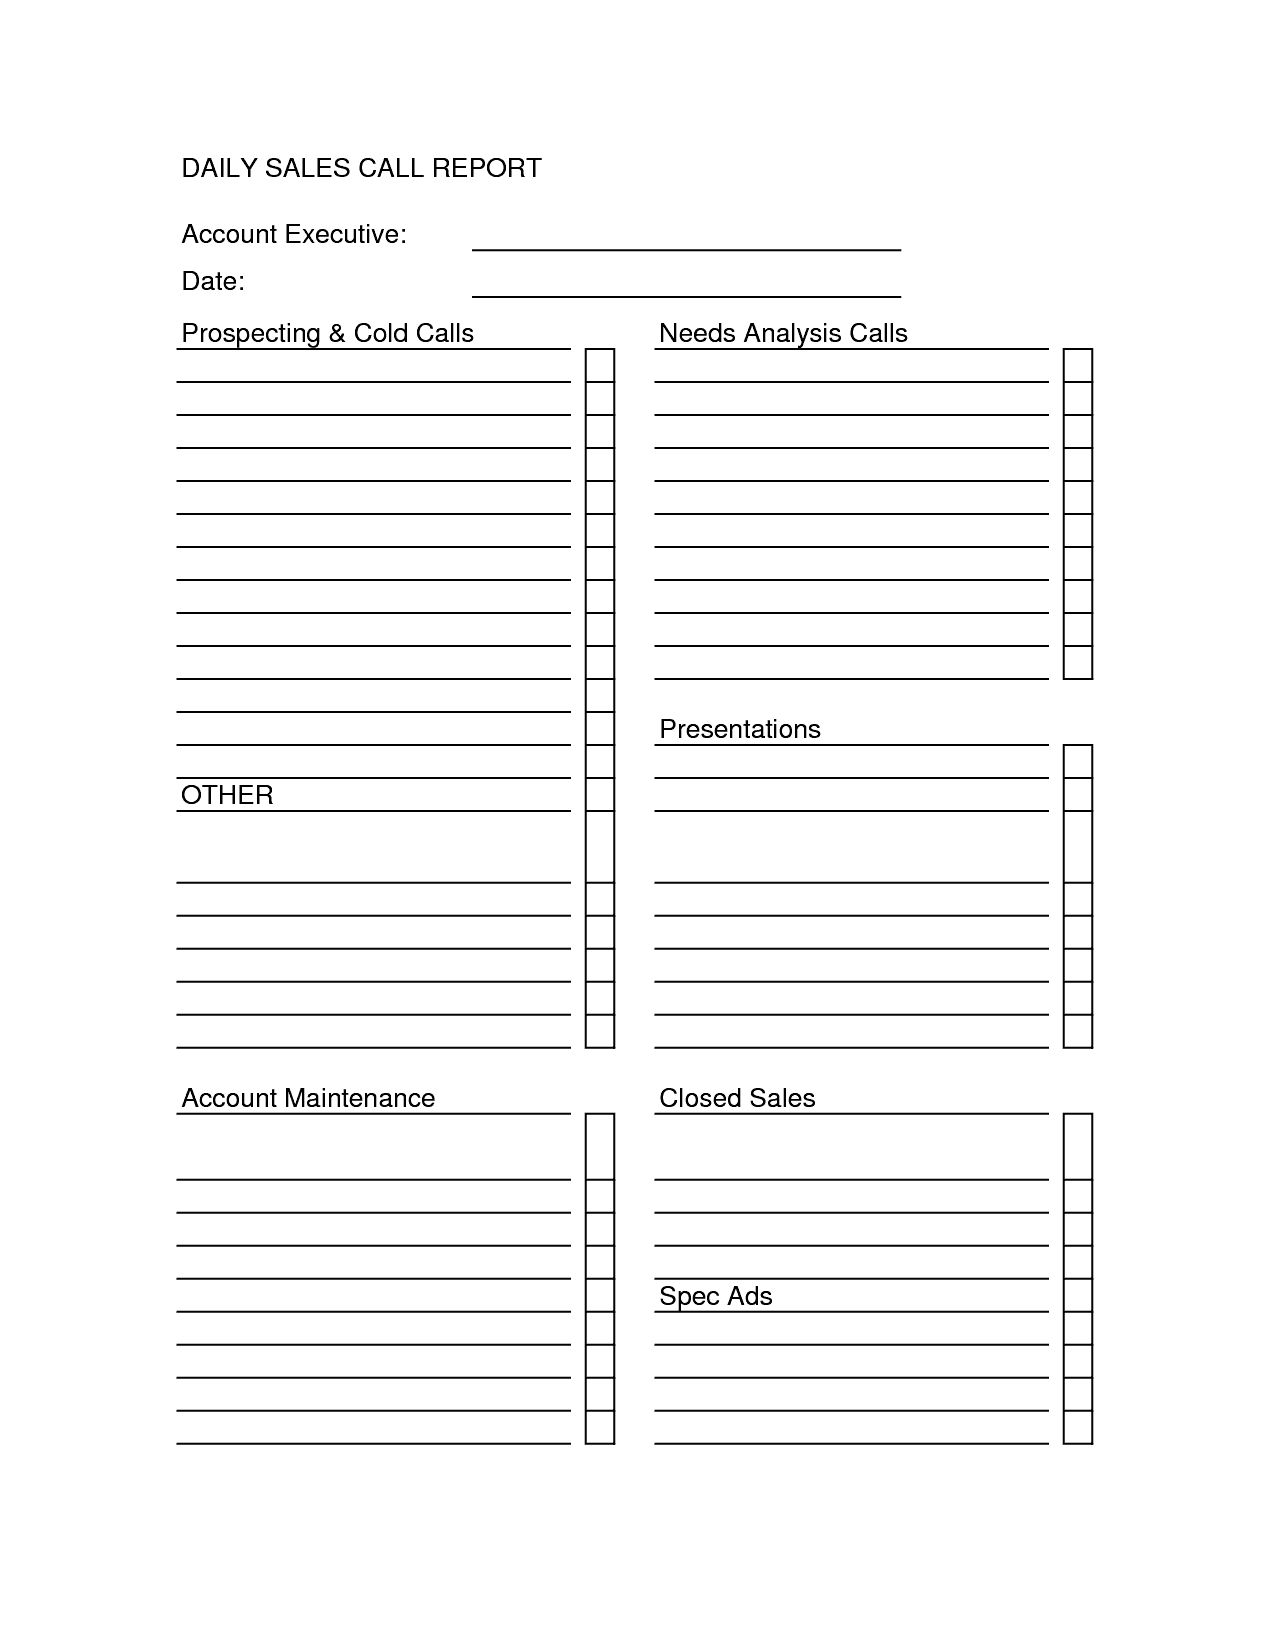 Sales Call Report Templates - Word Excel Fomats Inside Daily Sales Call Report Template Free Download